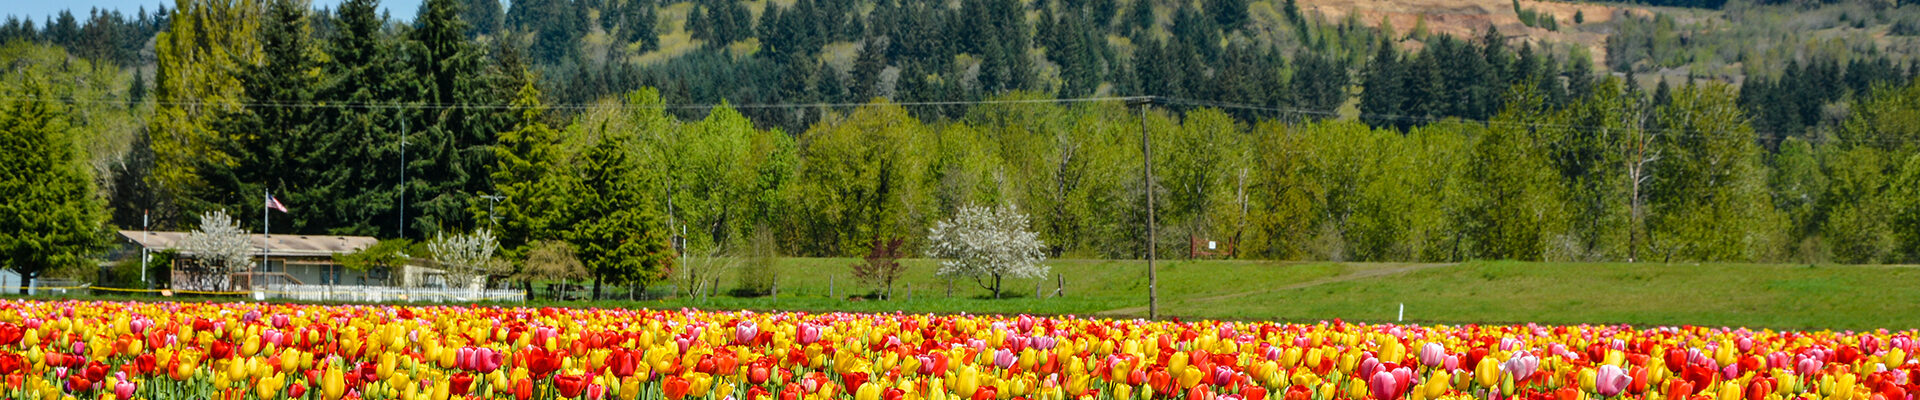 Flower bed of tulips at Woodland Tulip festival